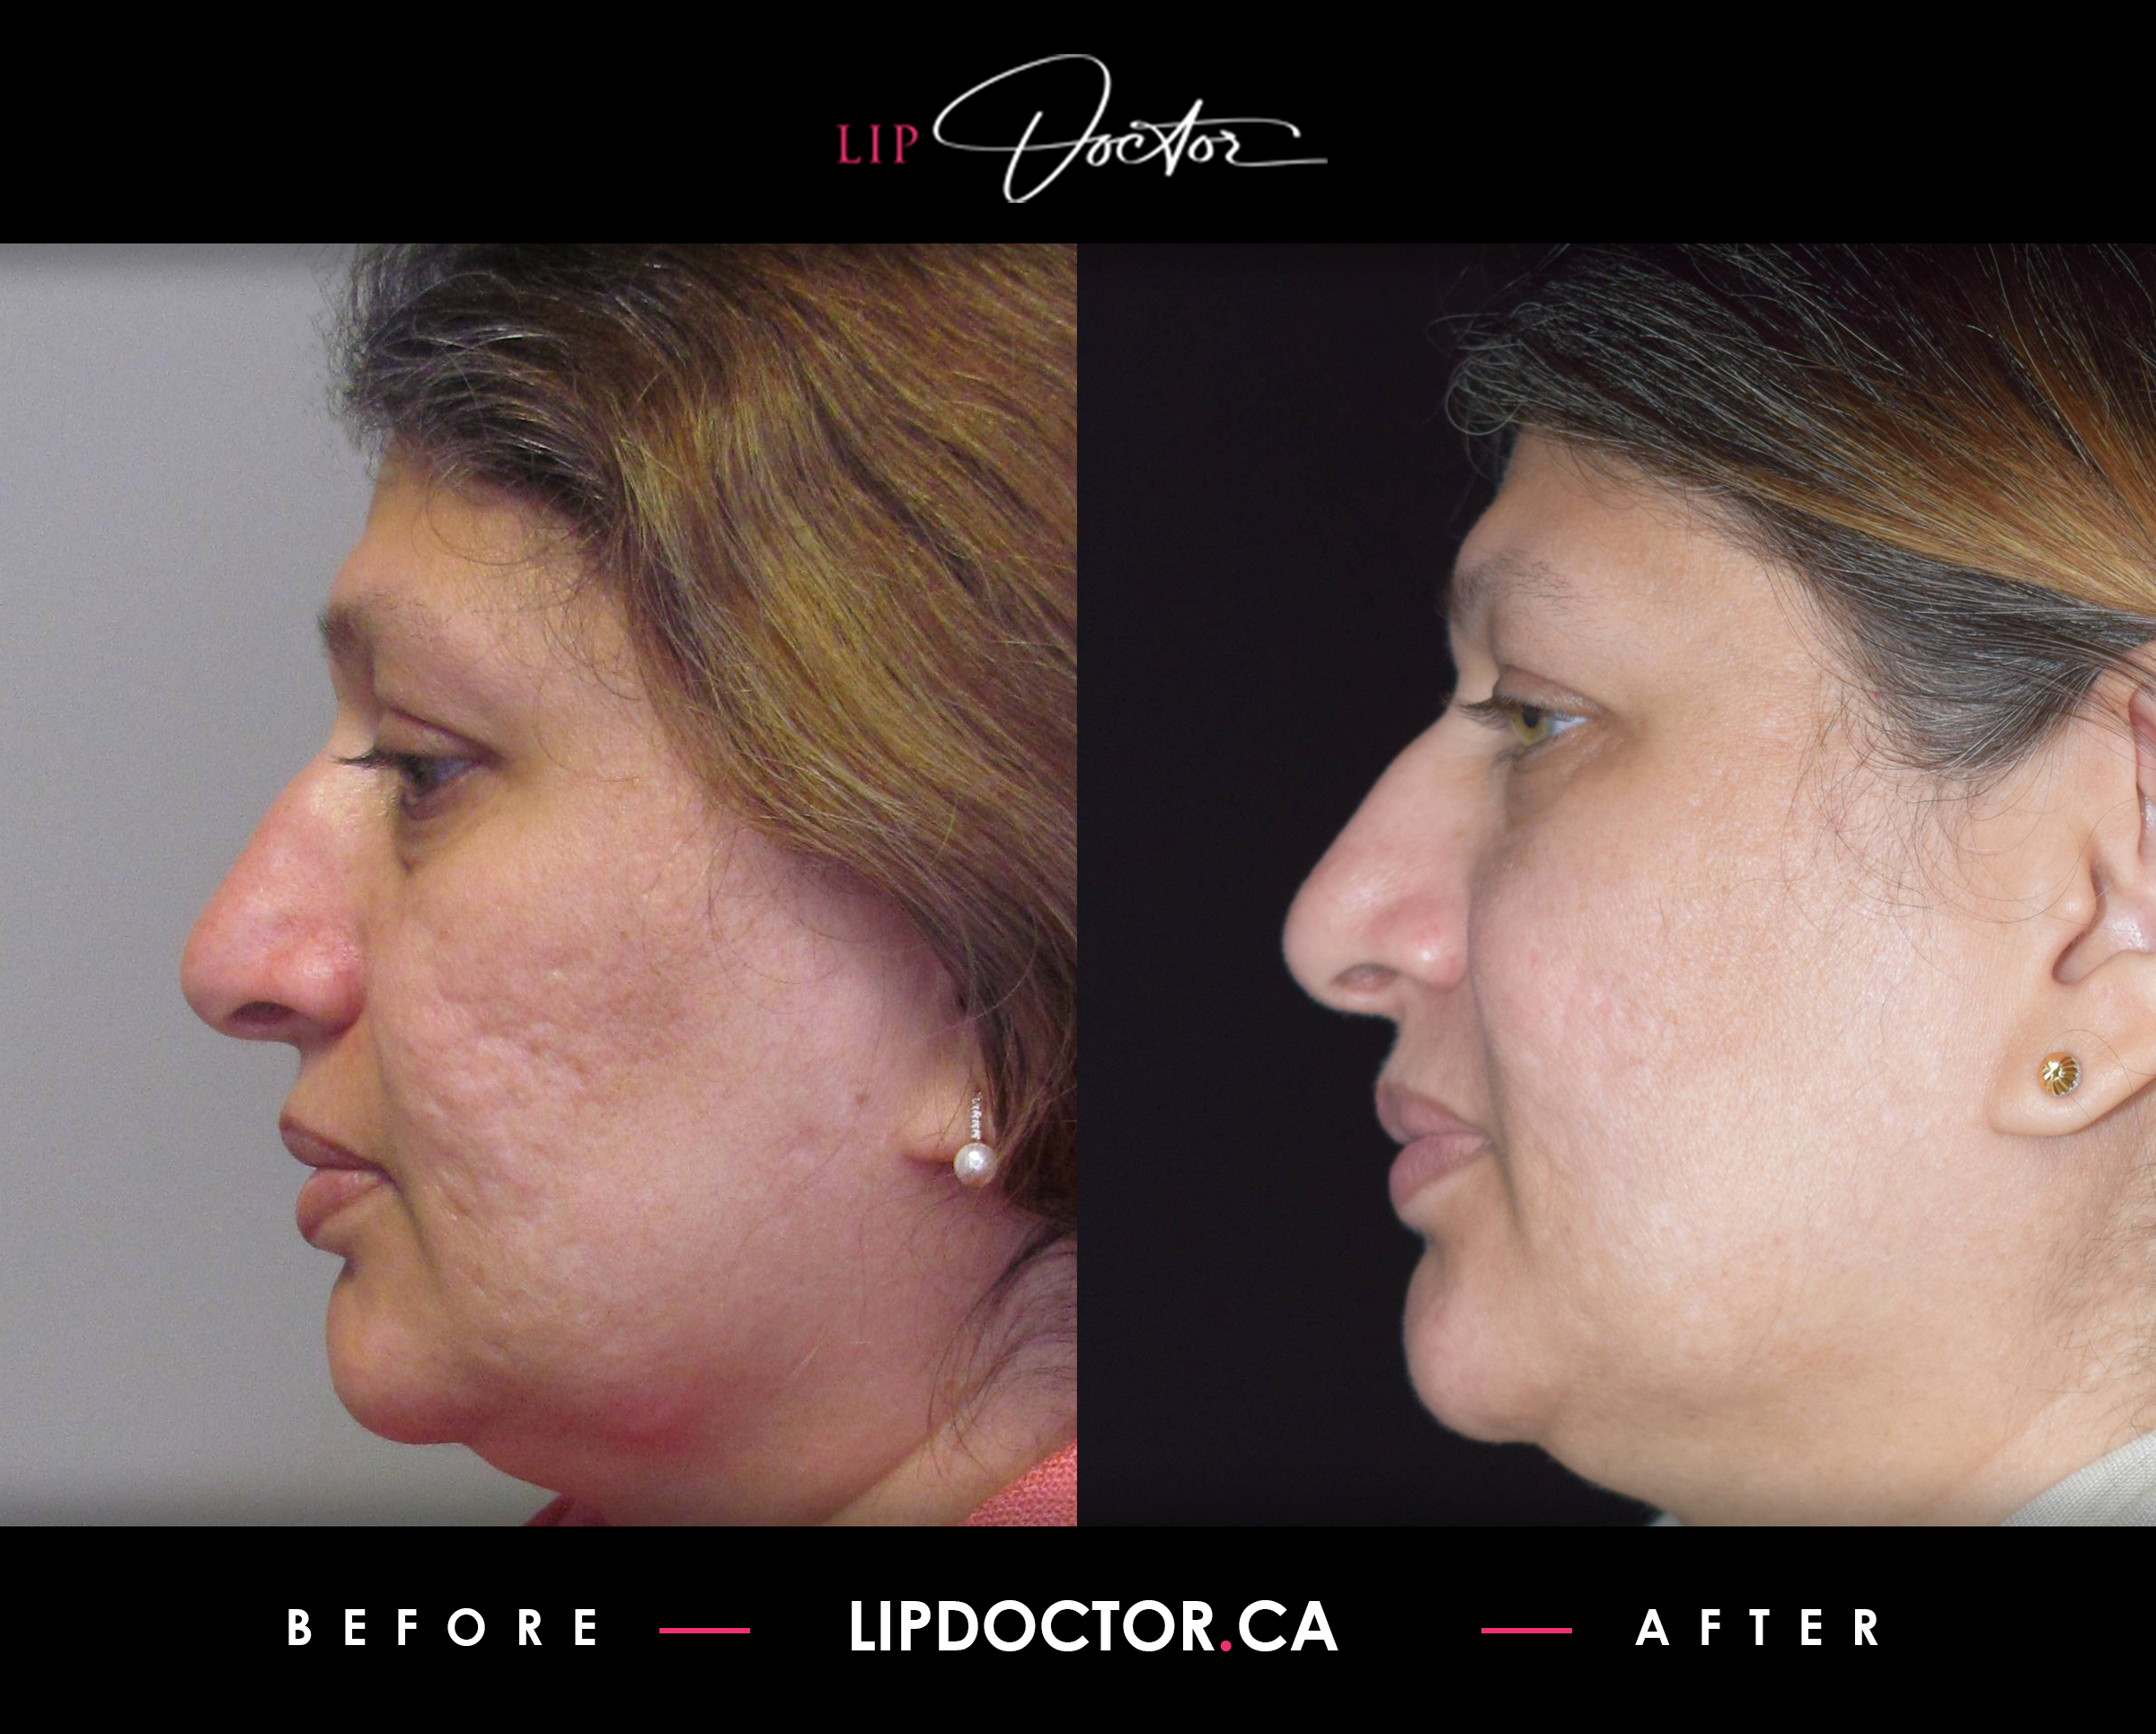 Before and after images of a successful Fractora treatment by Lip Doctor. The 'Before' image displays noticeable acne scarring and uneven skin texture, while the 'After' image showcases significant improvement with smoother, clearer, and rejuvenated skin, highlighting the effectiveness of Fractora in treating skin conditions.